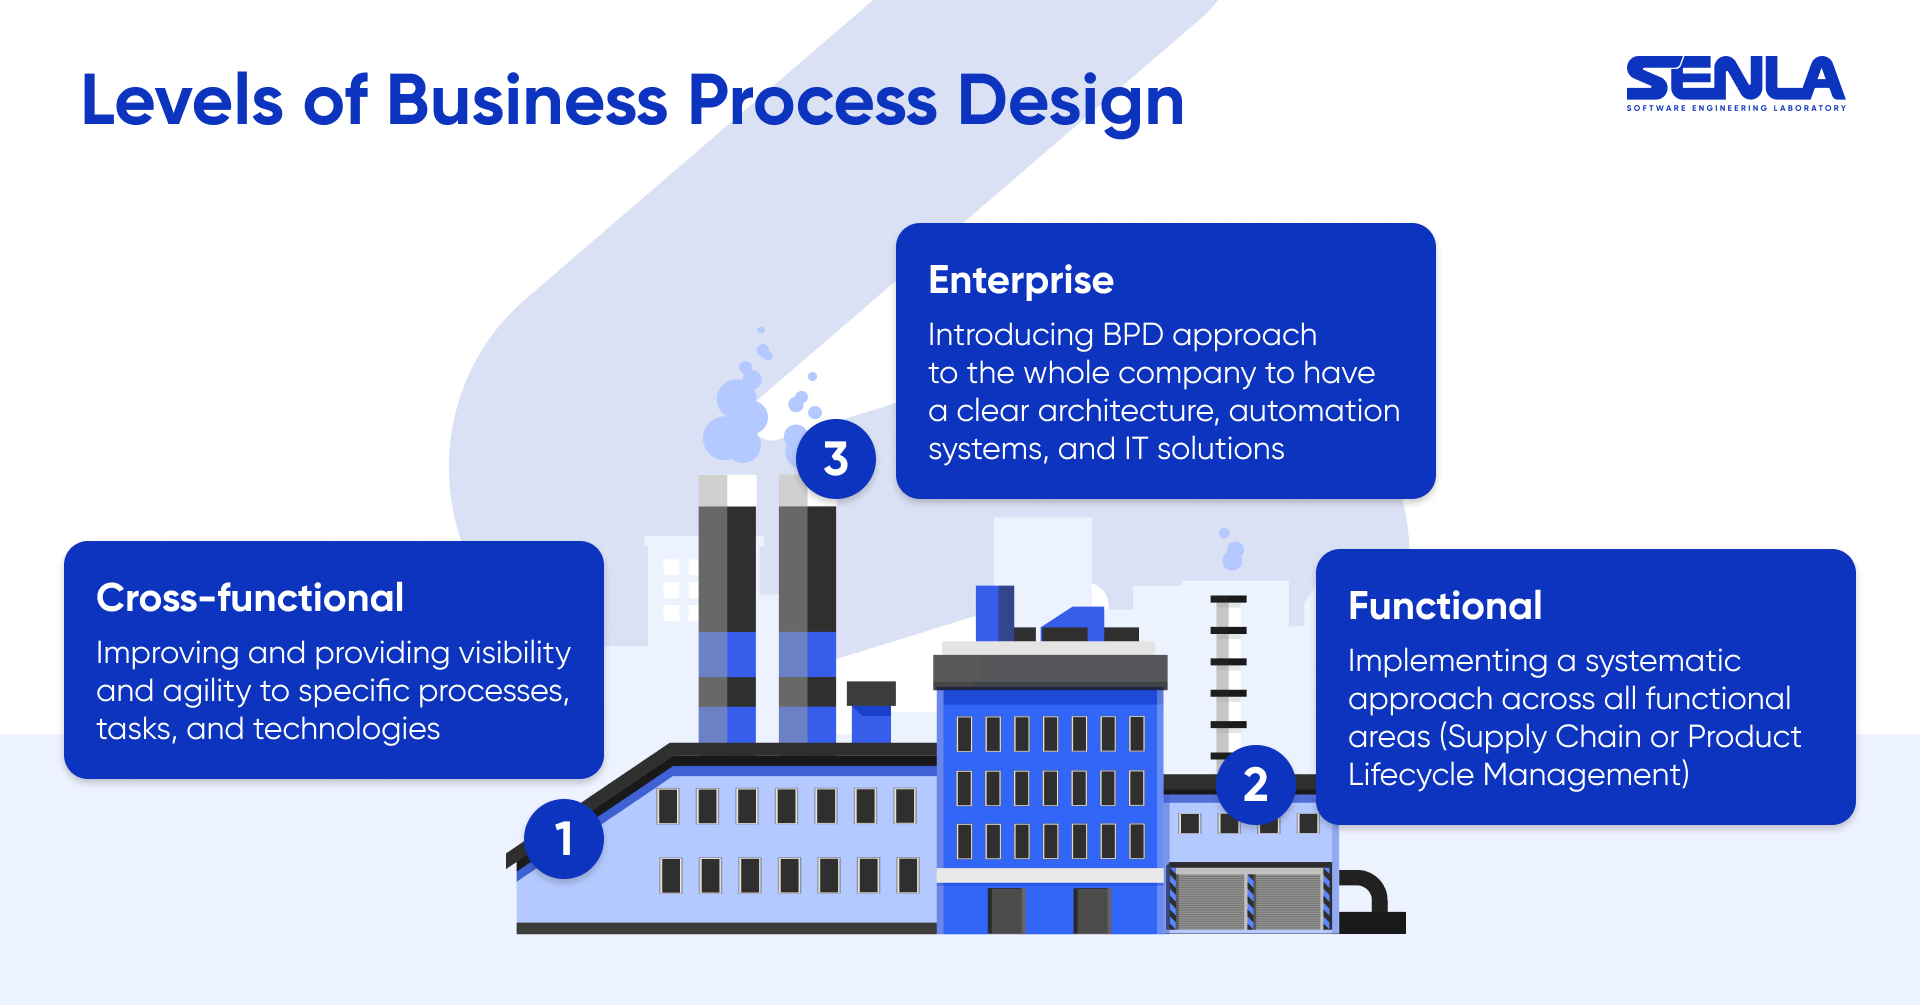 Levels of business process design